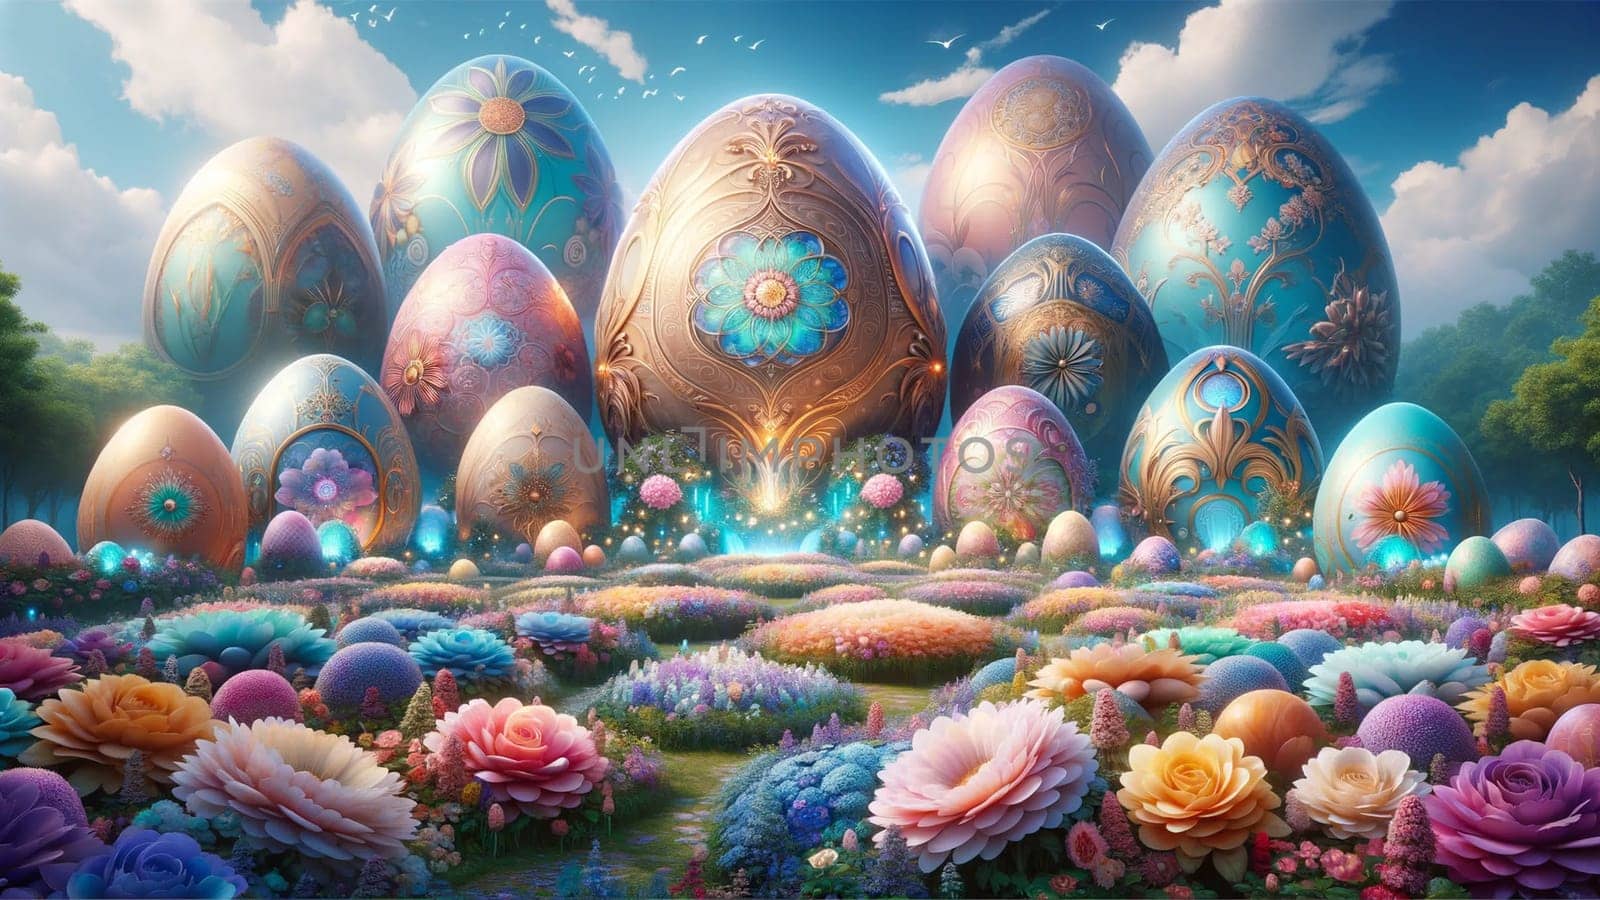 A magical landscape filled with oversized, intricately decorated pastel Easter eggs nestled among a field of vibrant spring flowers under a clear blue sky. by Designlab